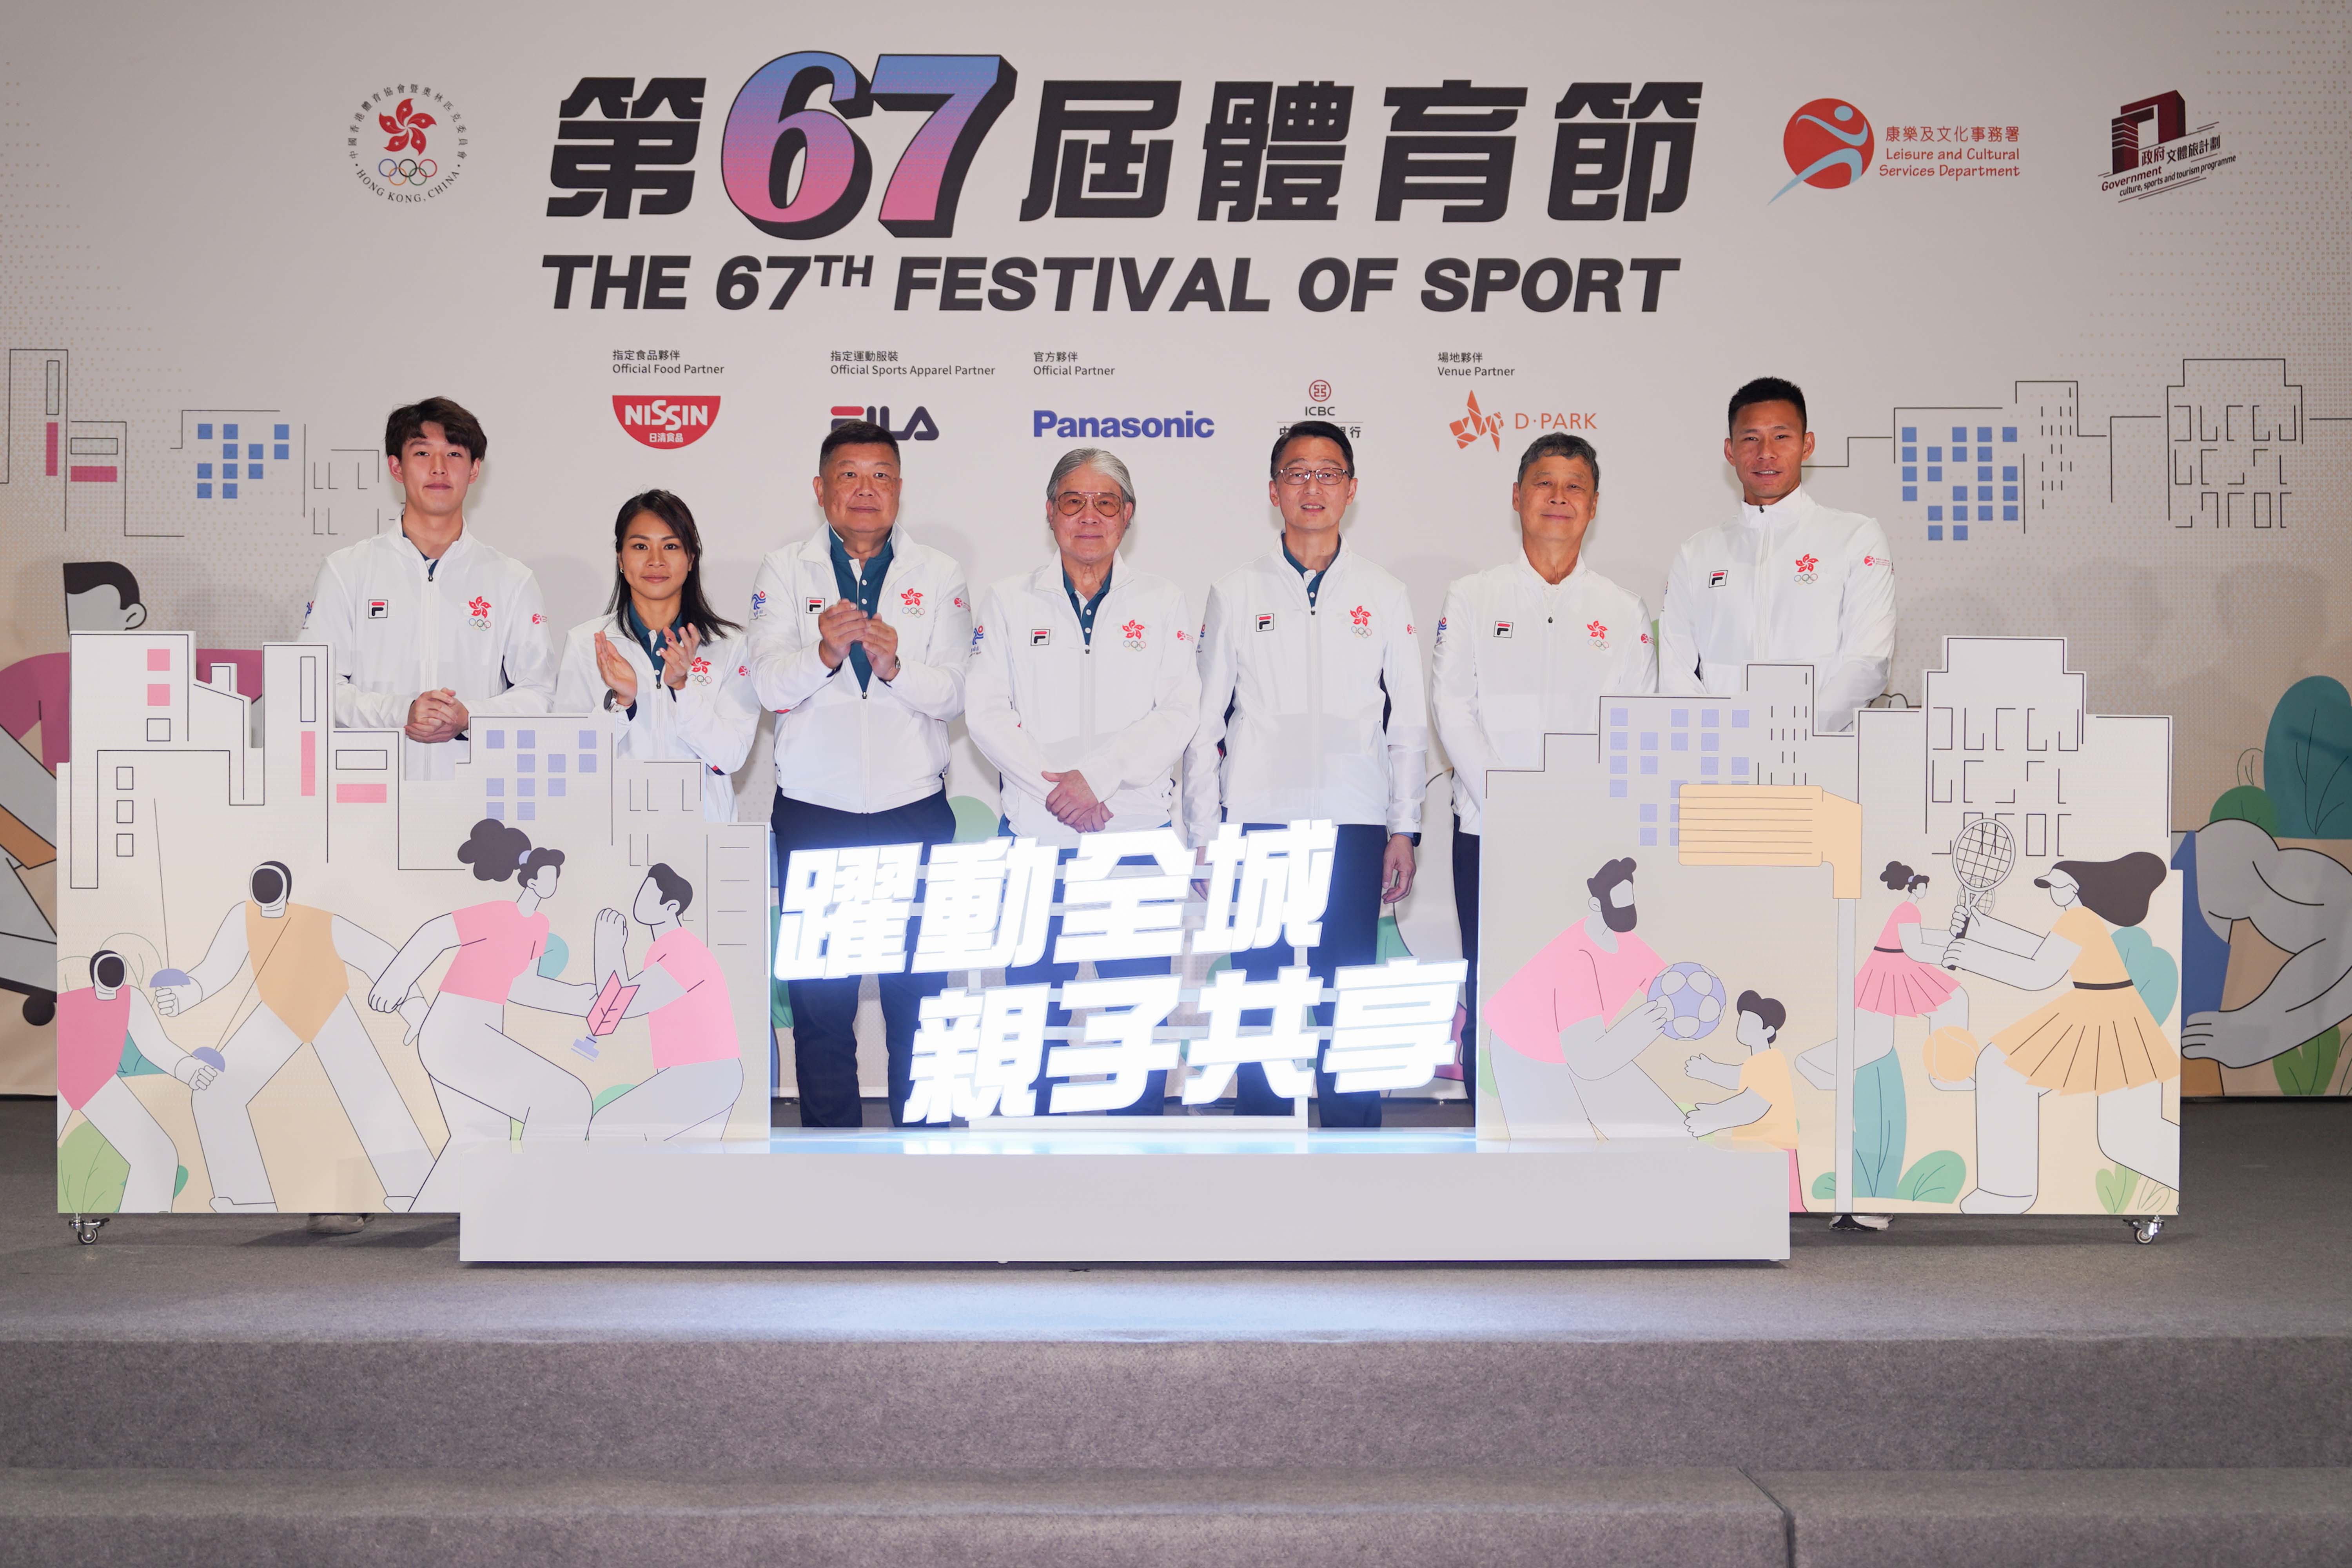 "City in Motion, Share in Family Fun" Embrace the Craze for Sports in the 67th FOS